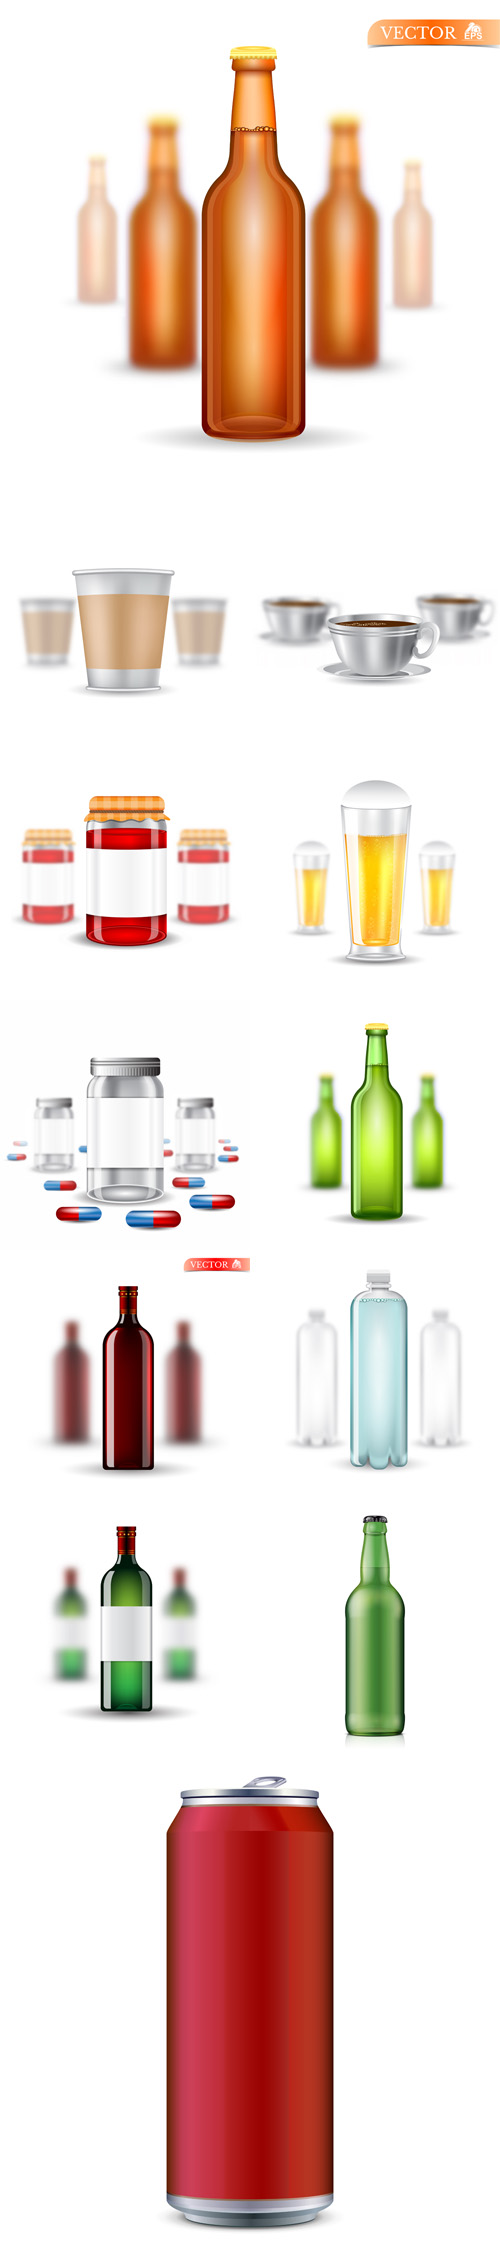 Vectors - Realistic Mock up of Bottles and Cups